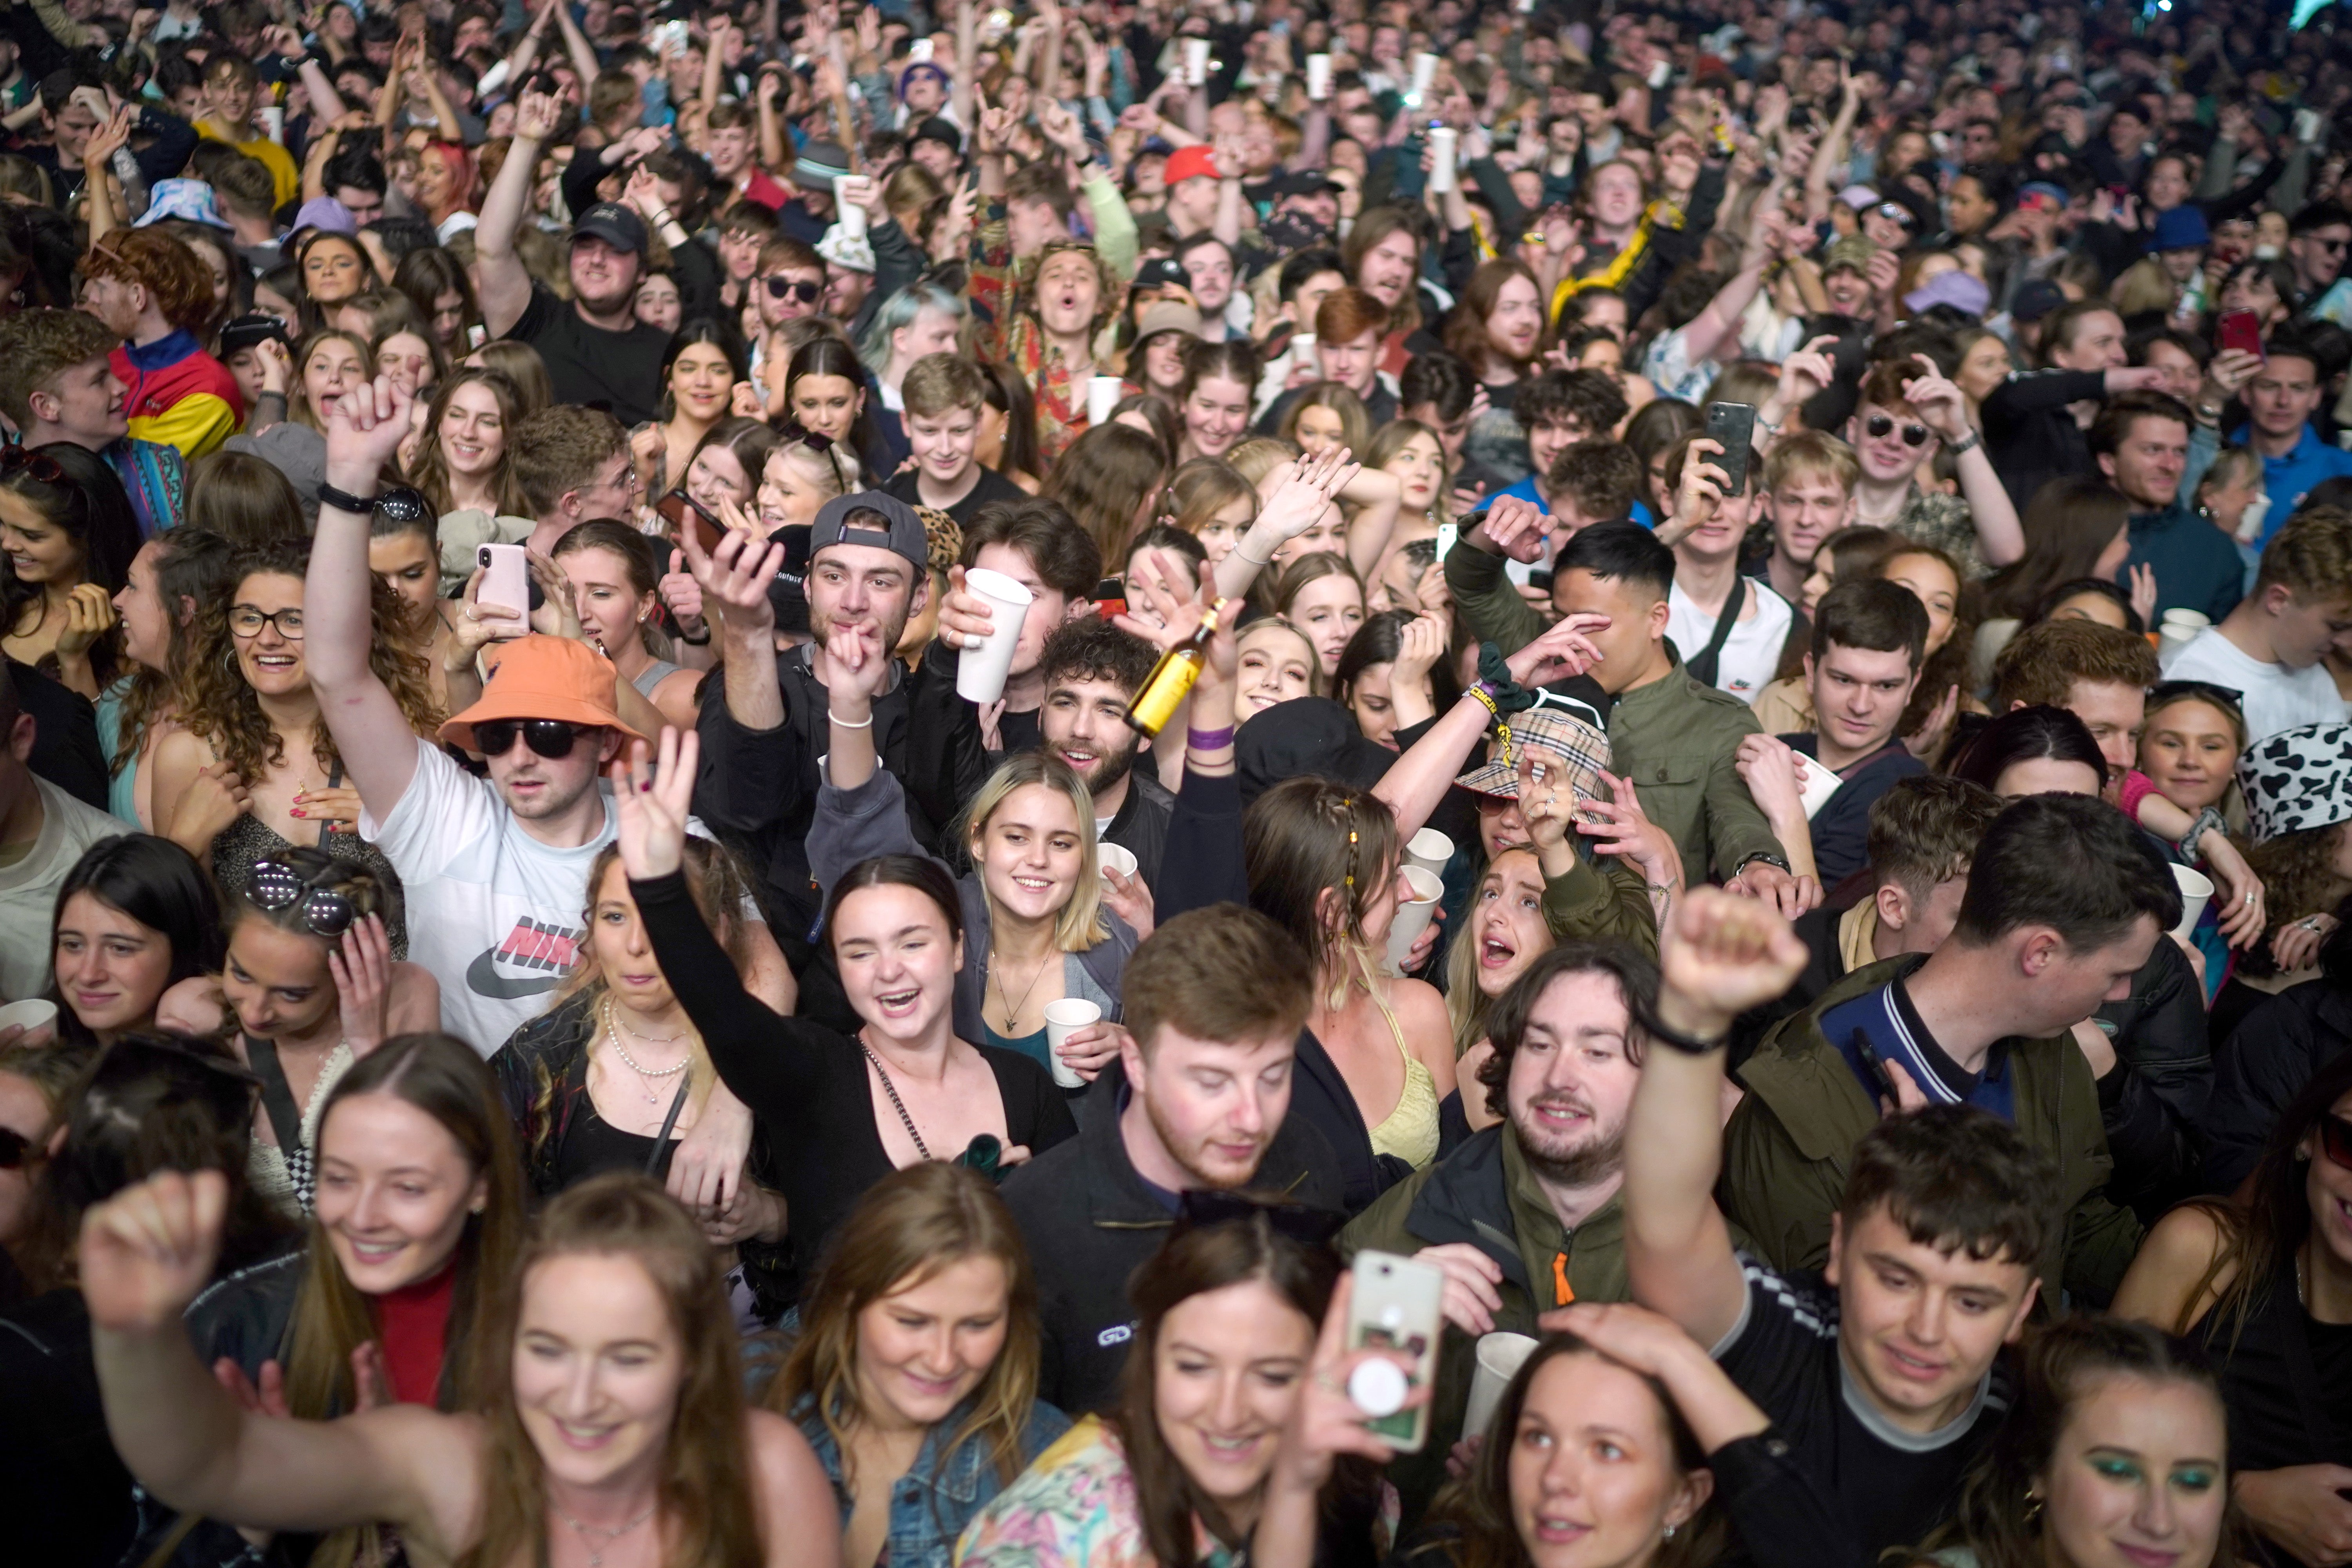 Concert-goers enjoy a non-socially distanced outdoor live music event at Sefton Park on May 2, 2021 in Liverpool